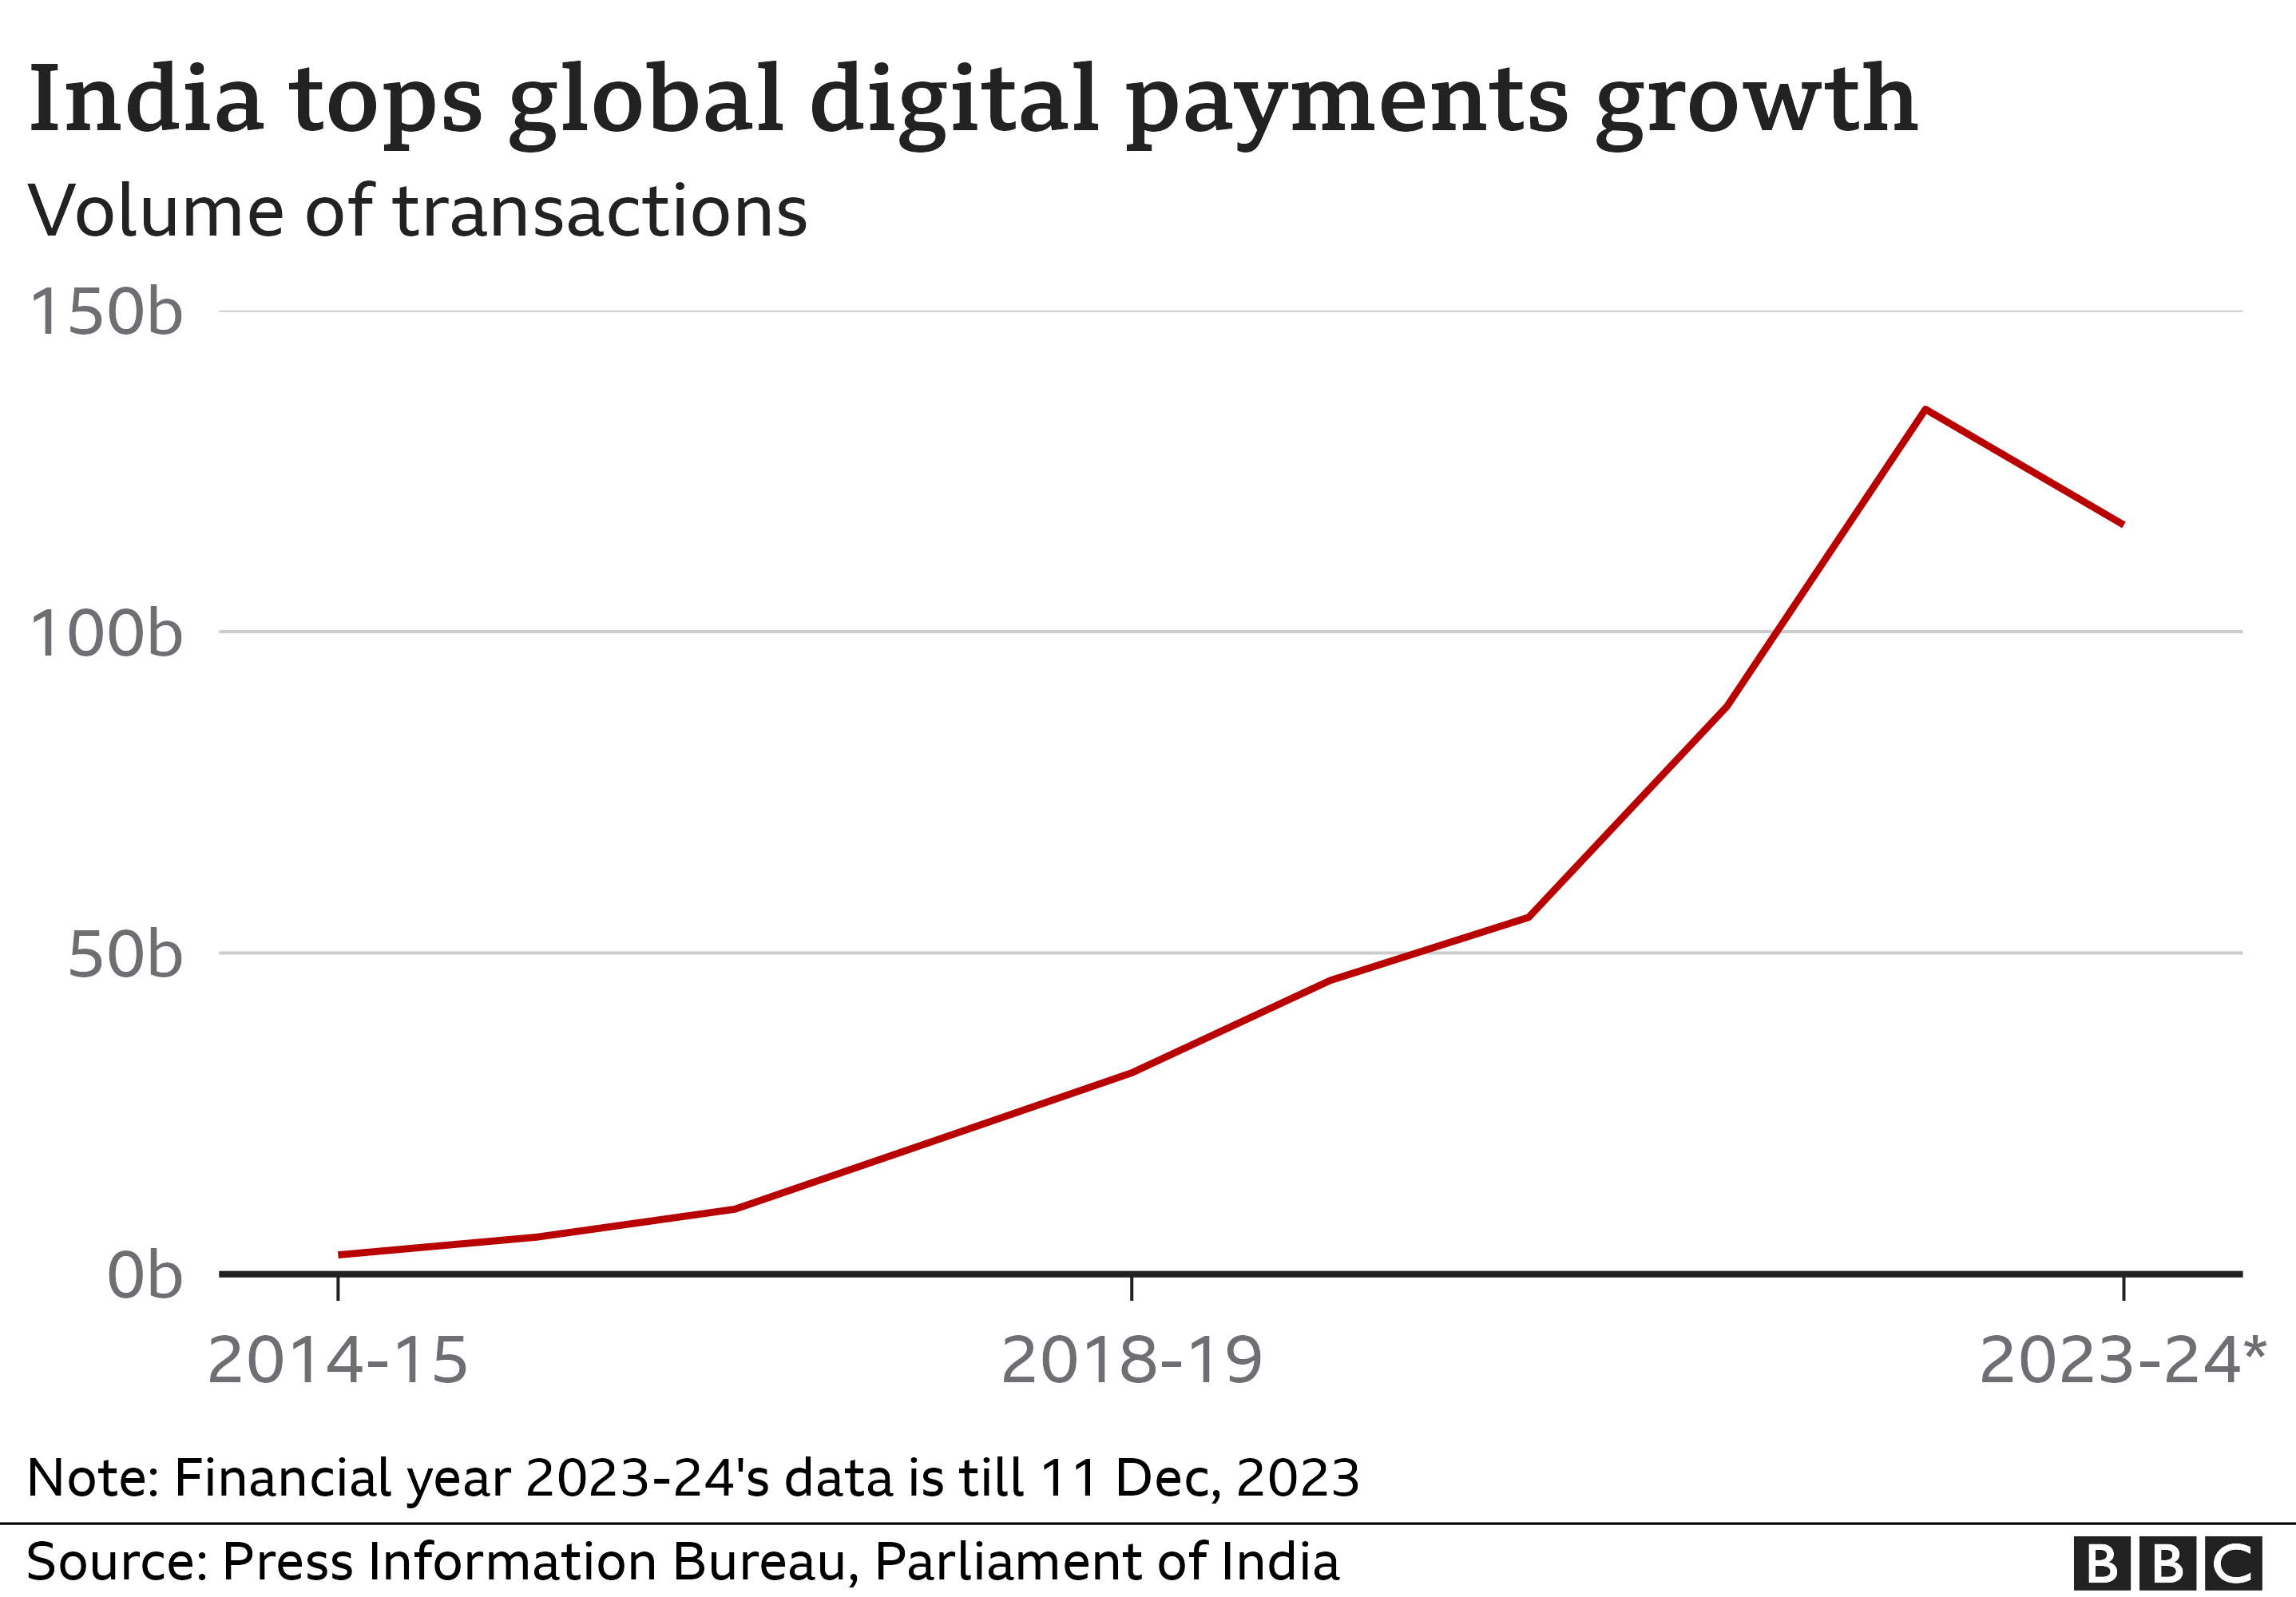 India's digital payments growth